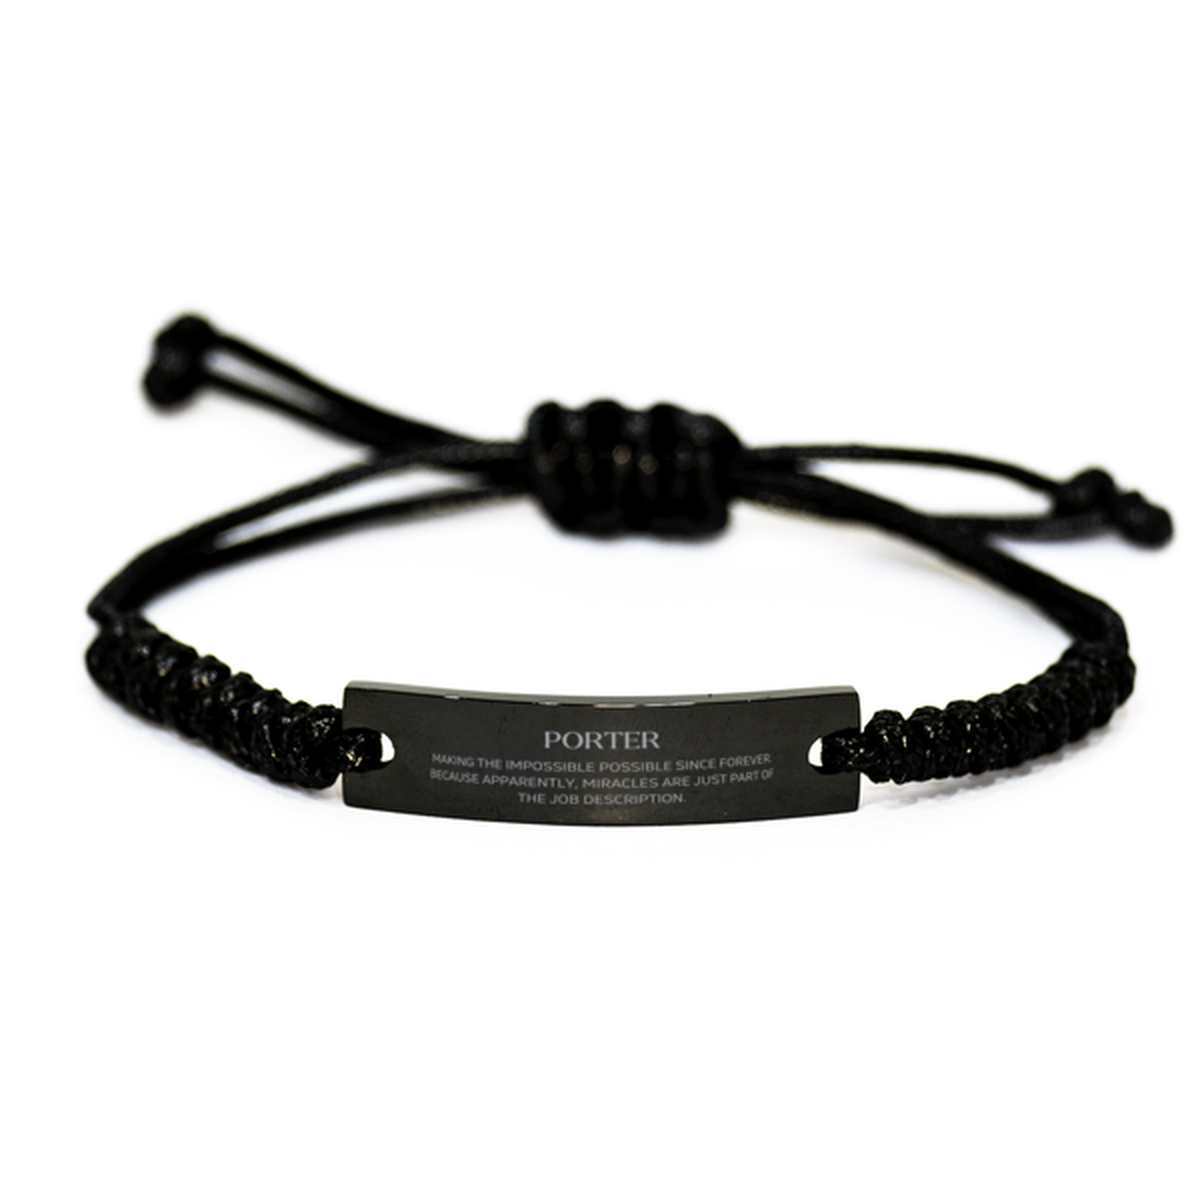 Funny Porter Gifts, Miracles are just part of the job description, Inspirational Birthday Black Rope Bracelet For Porter, Men, Women, Coworkers, Friends, Boss